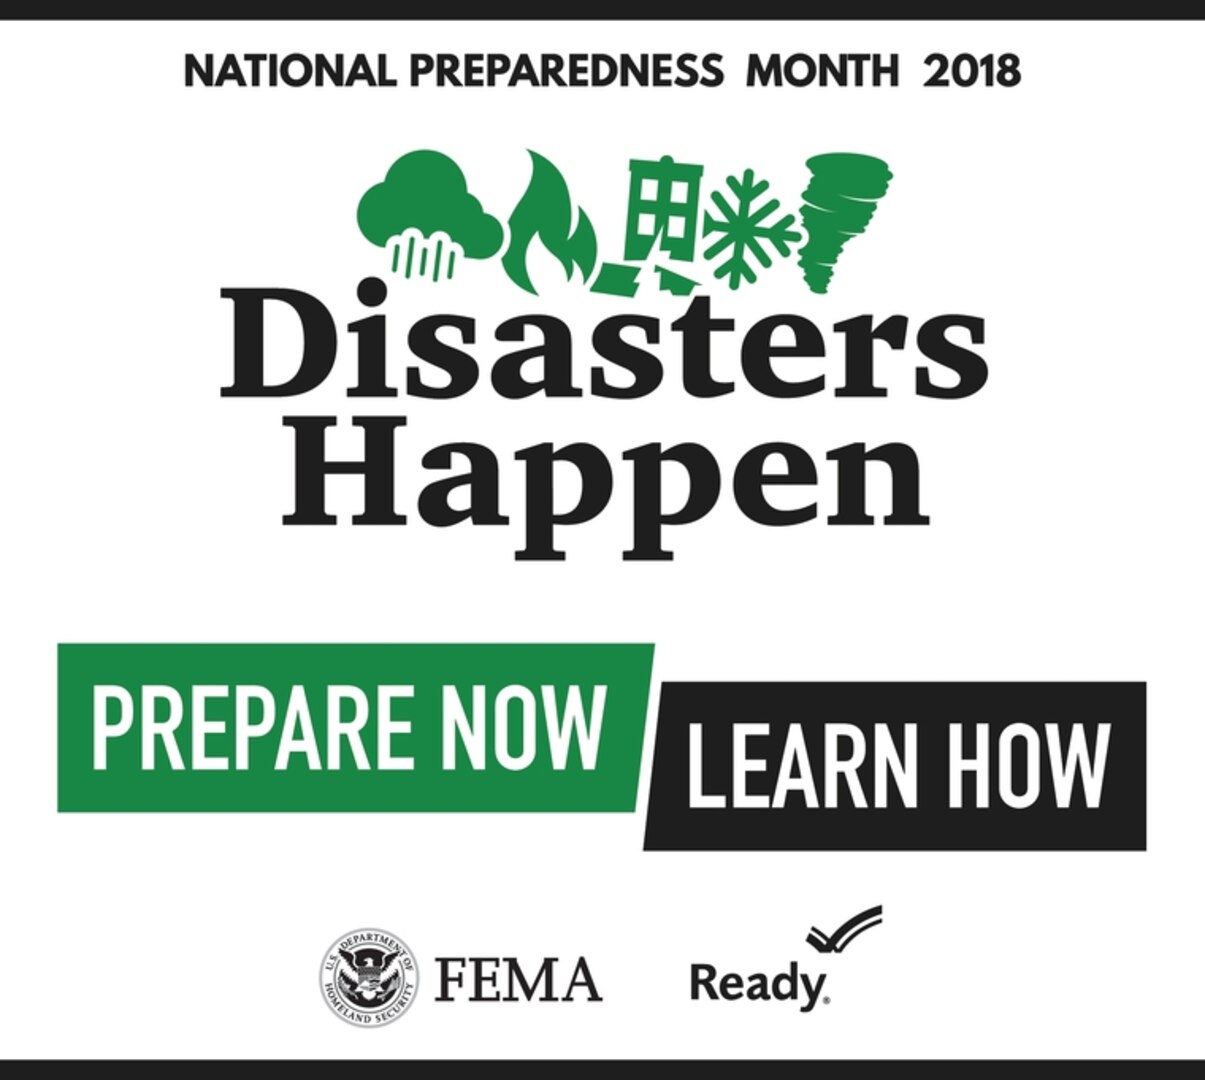 Disasters can strike at any moment, and individuals should take action to prepare themselves for emergency situations. September is National Preparedness Month, and this year's national theme is "Disasters Happen. Prepare Now. Learn How."